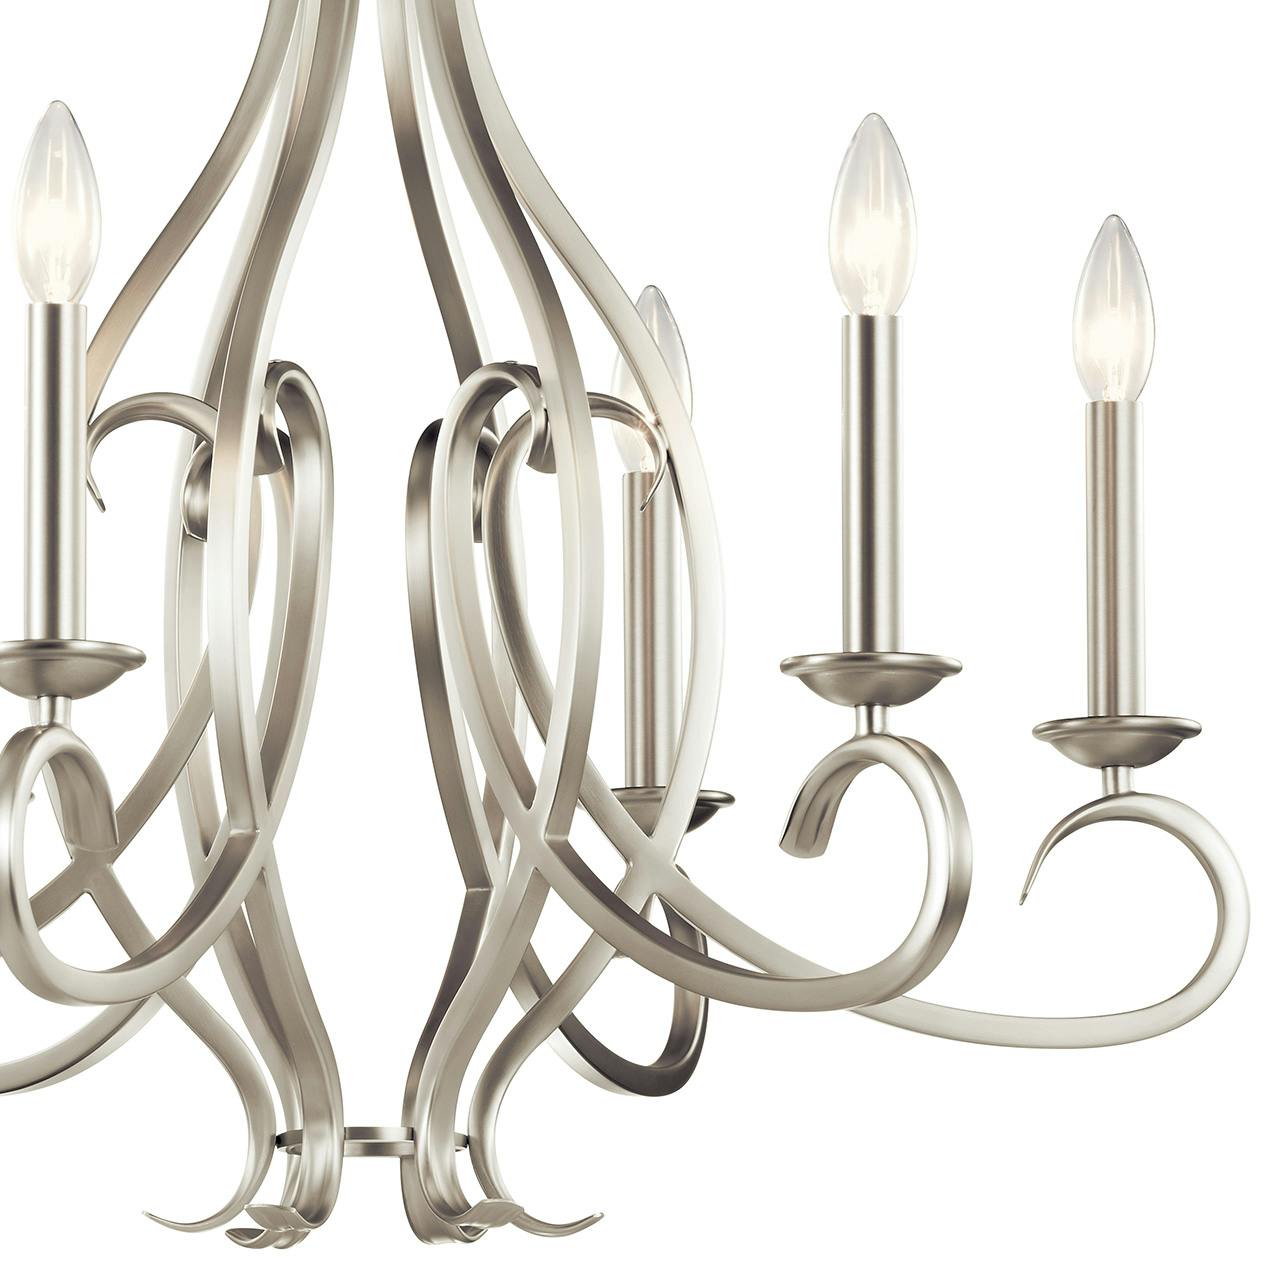 Close up view of the Ania 6 Light Chandelier Brushed Nickel on a white background